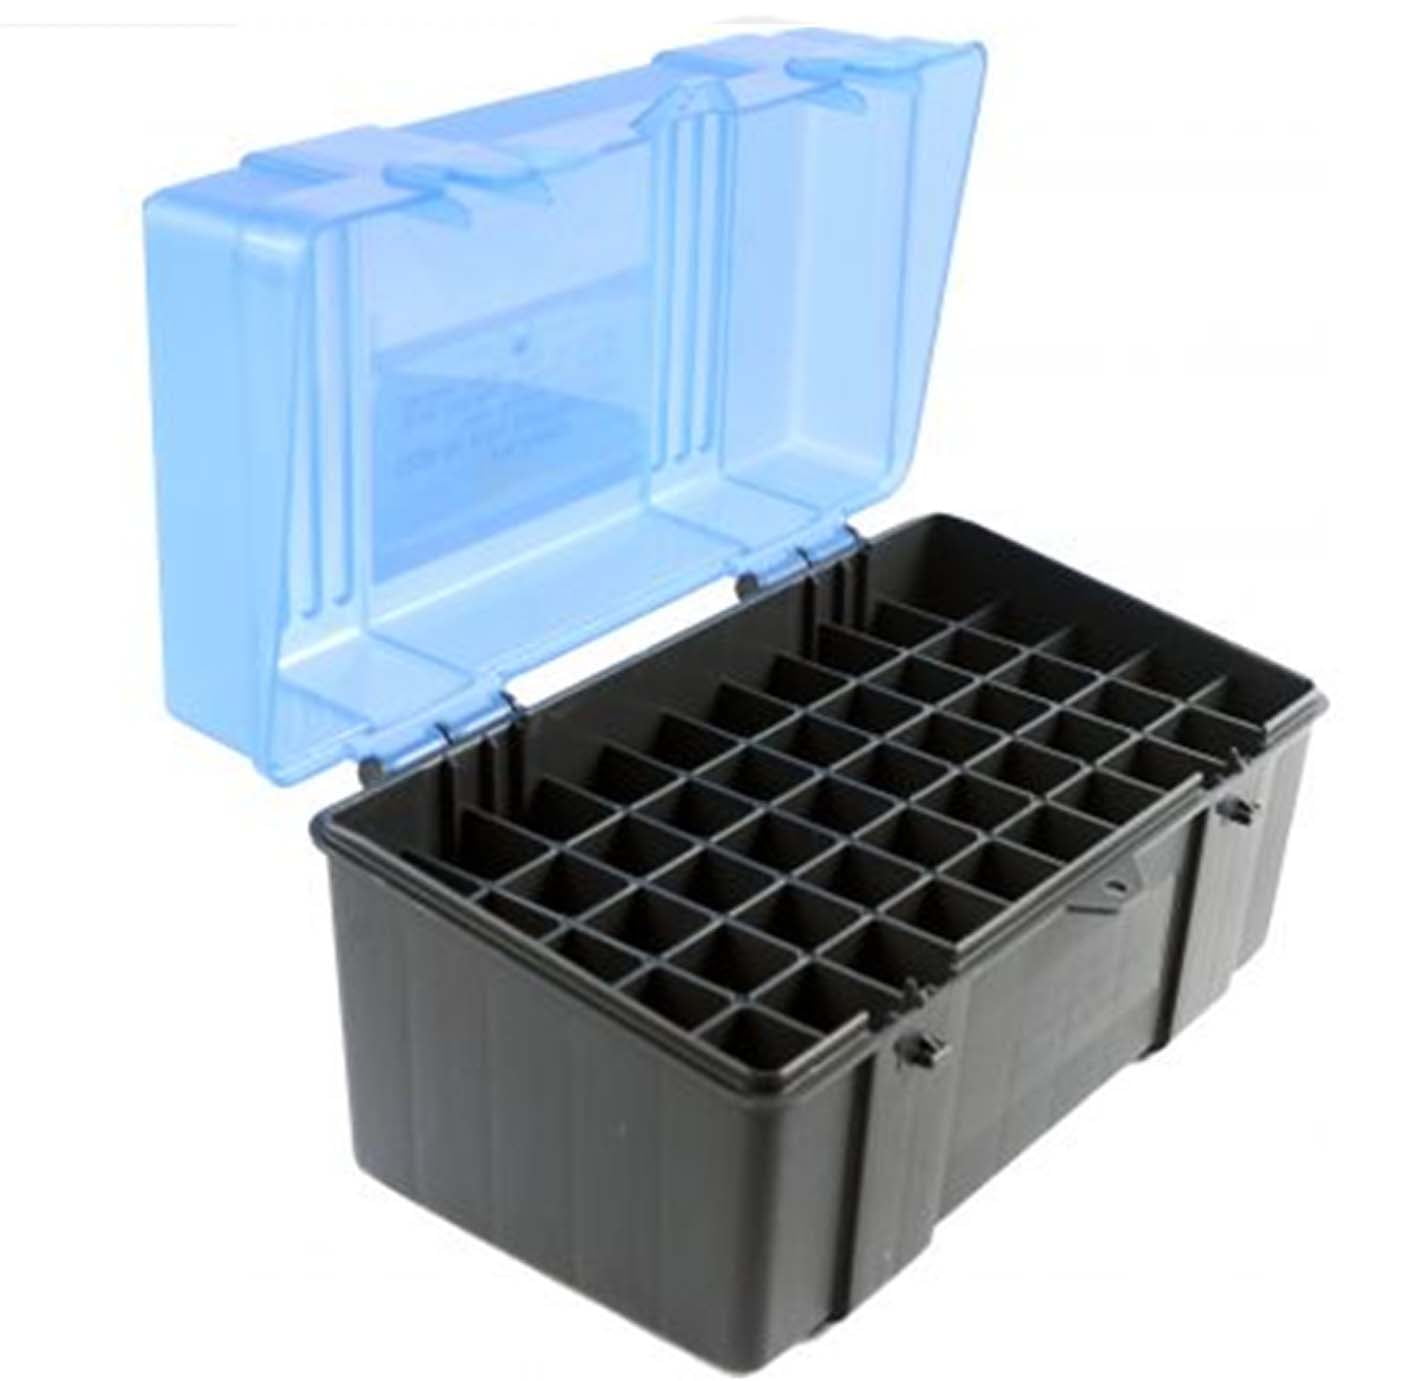 Plano Flip Top Large Rifle Ammo Case 50 Round Gray/blue 123050 for sale online 